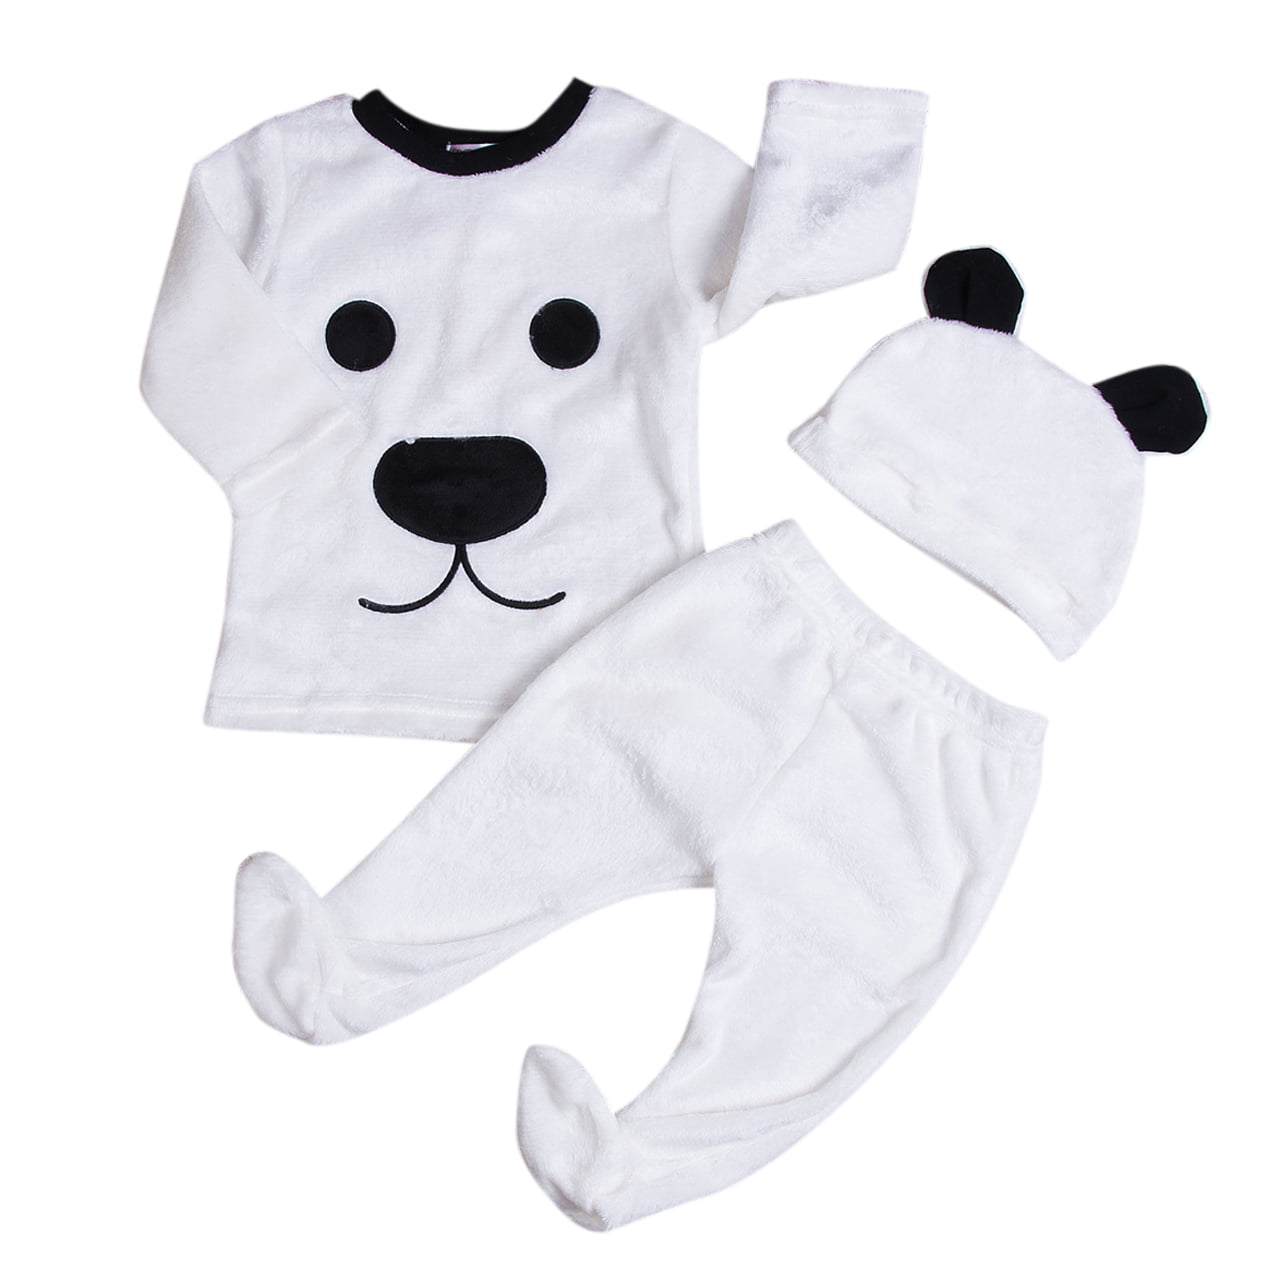 2PCS Toddler Unisex Baby Long Sleeves Cartoon Bear Top Clothes+Pants Set Outfit